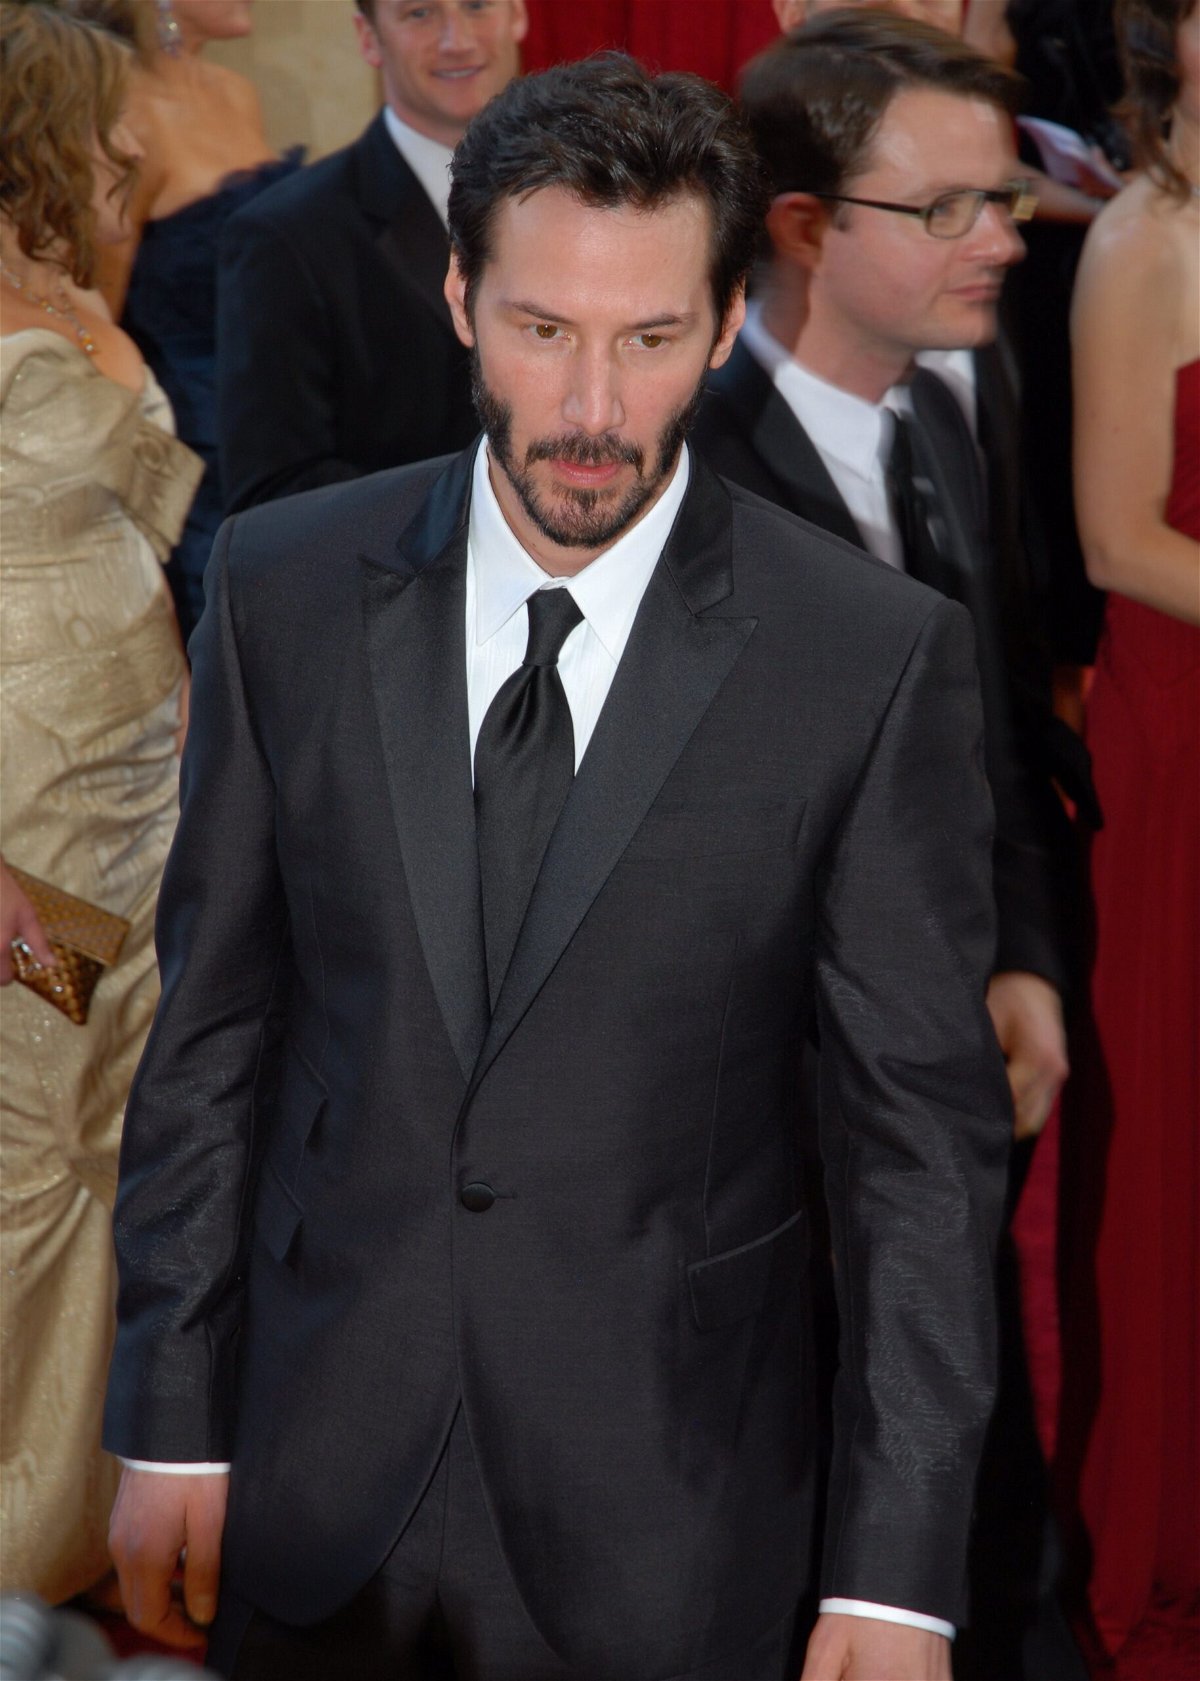 <i>CNN</i><br/>Actor Keanu Reeves has once again addressed talk that he and Winona Ryder are actually married. Reeves is shown here walking the red carpet at the 82nd Annual Academy Awards.